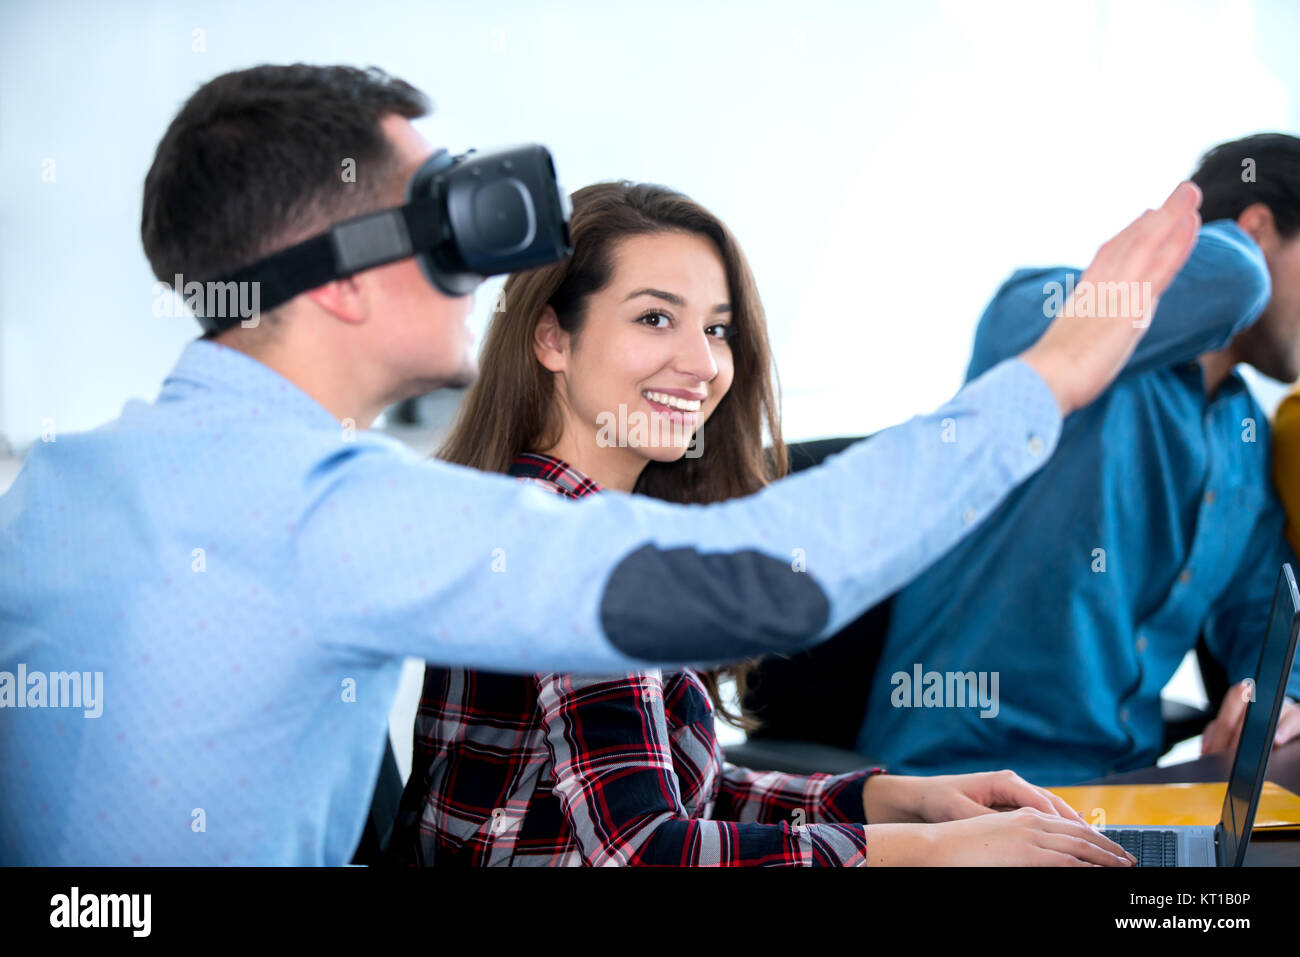 Young people having fun at startup metting discusting ideas Stock Photo